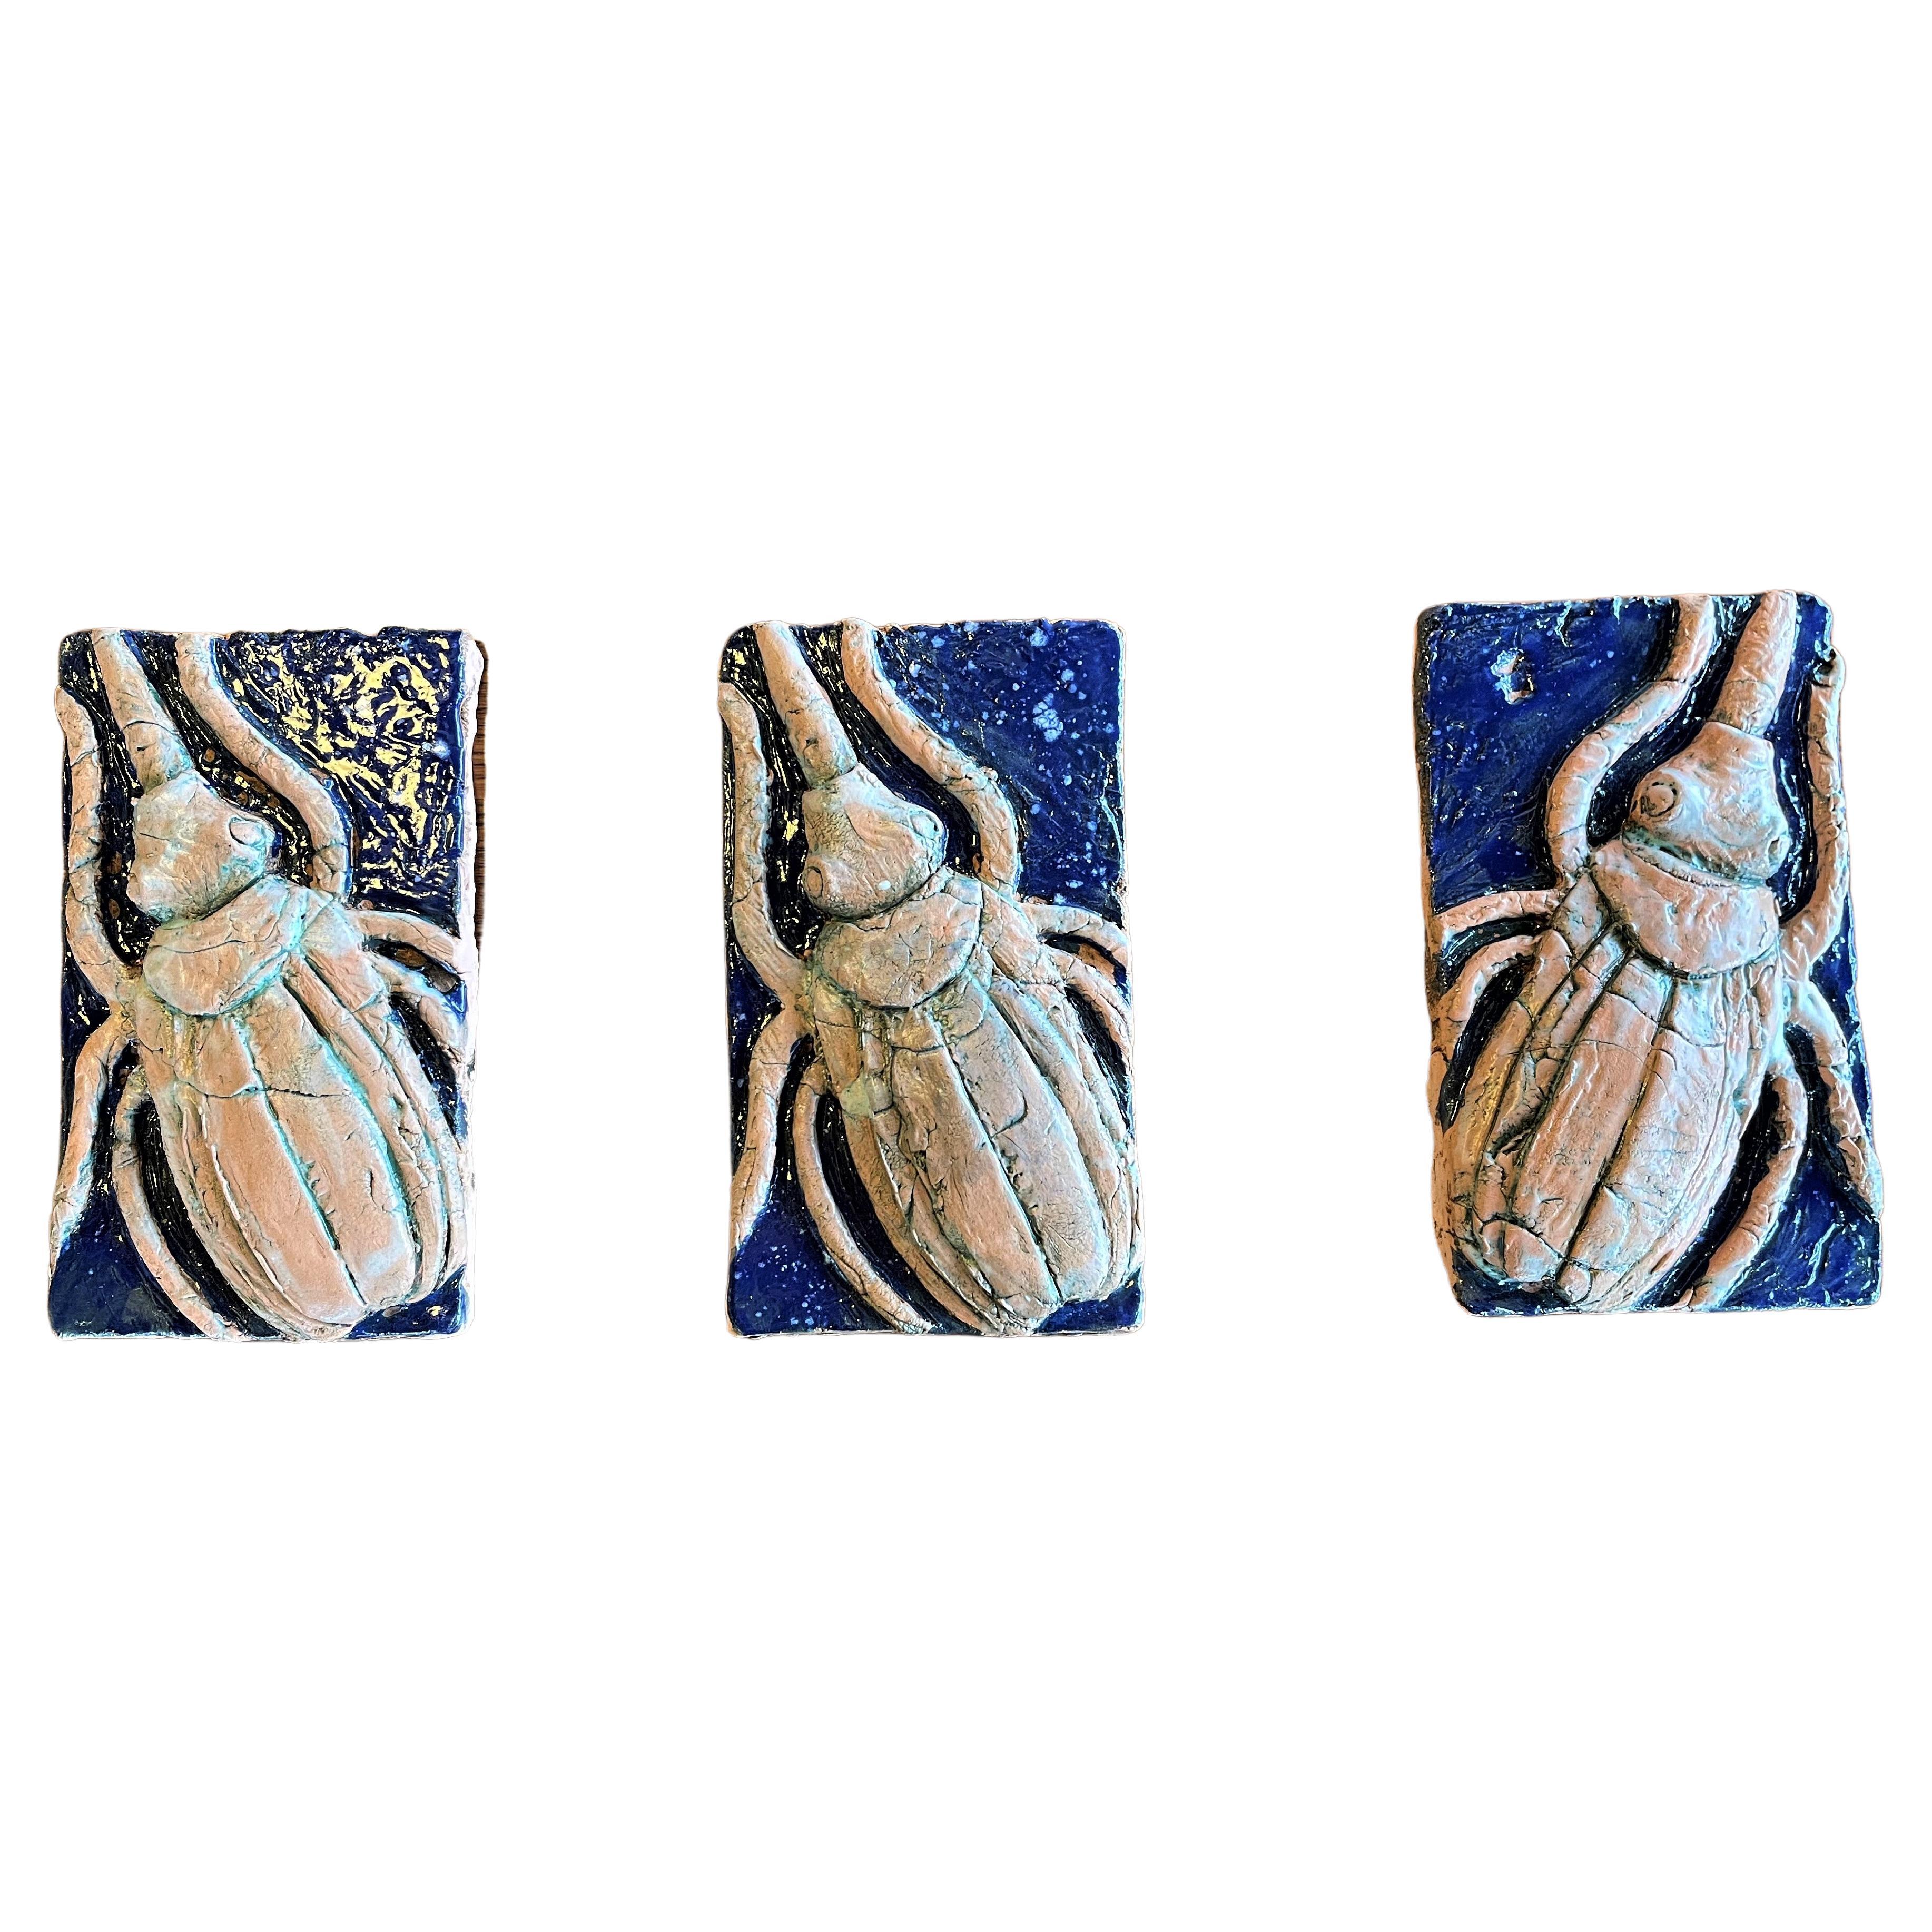 Custom Scarab Wall Tiles: Artist-Crafted and Hand Glazed Ceramic - Set of 3